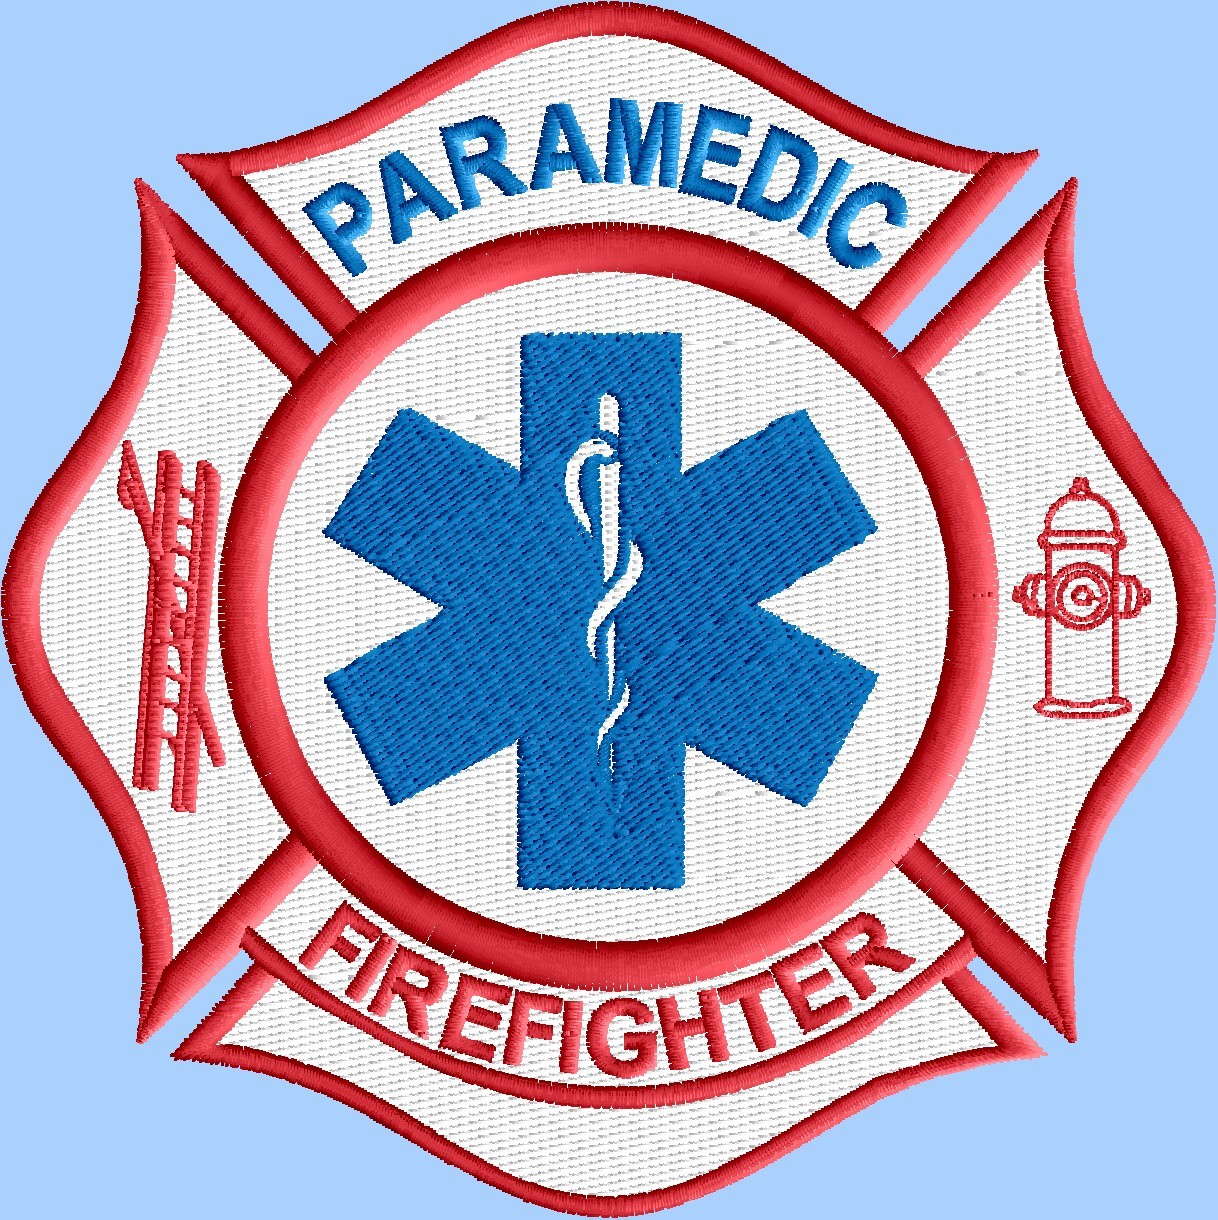 EMT Paramedic Firefighter logo 3 size pack and 50 similar items